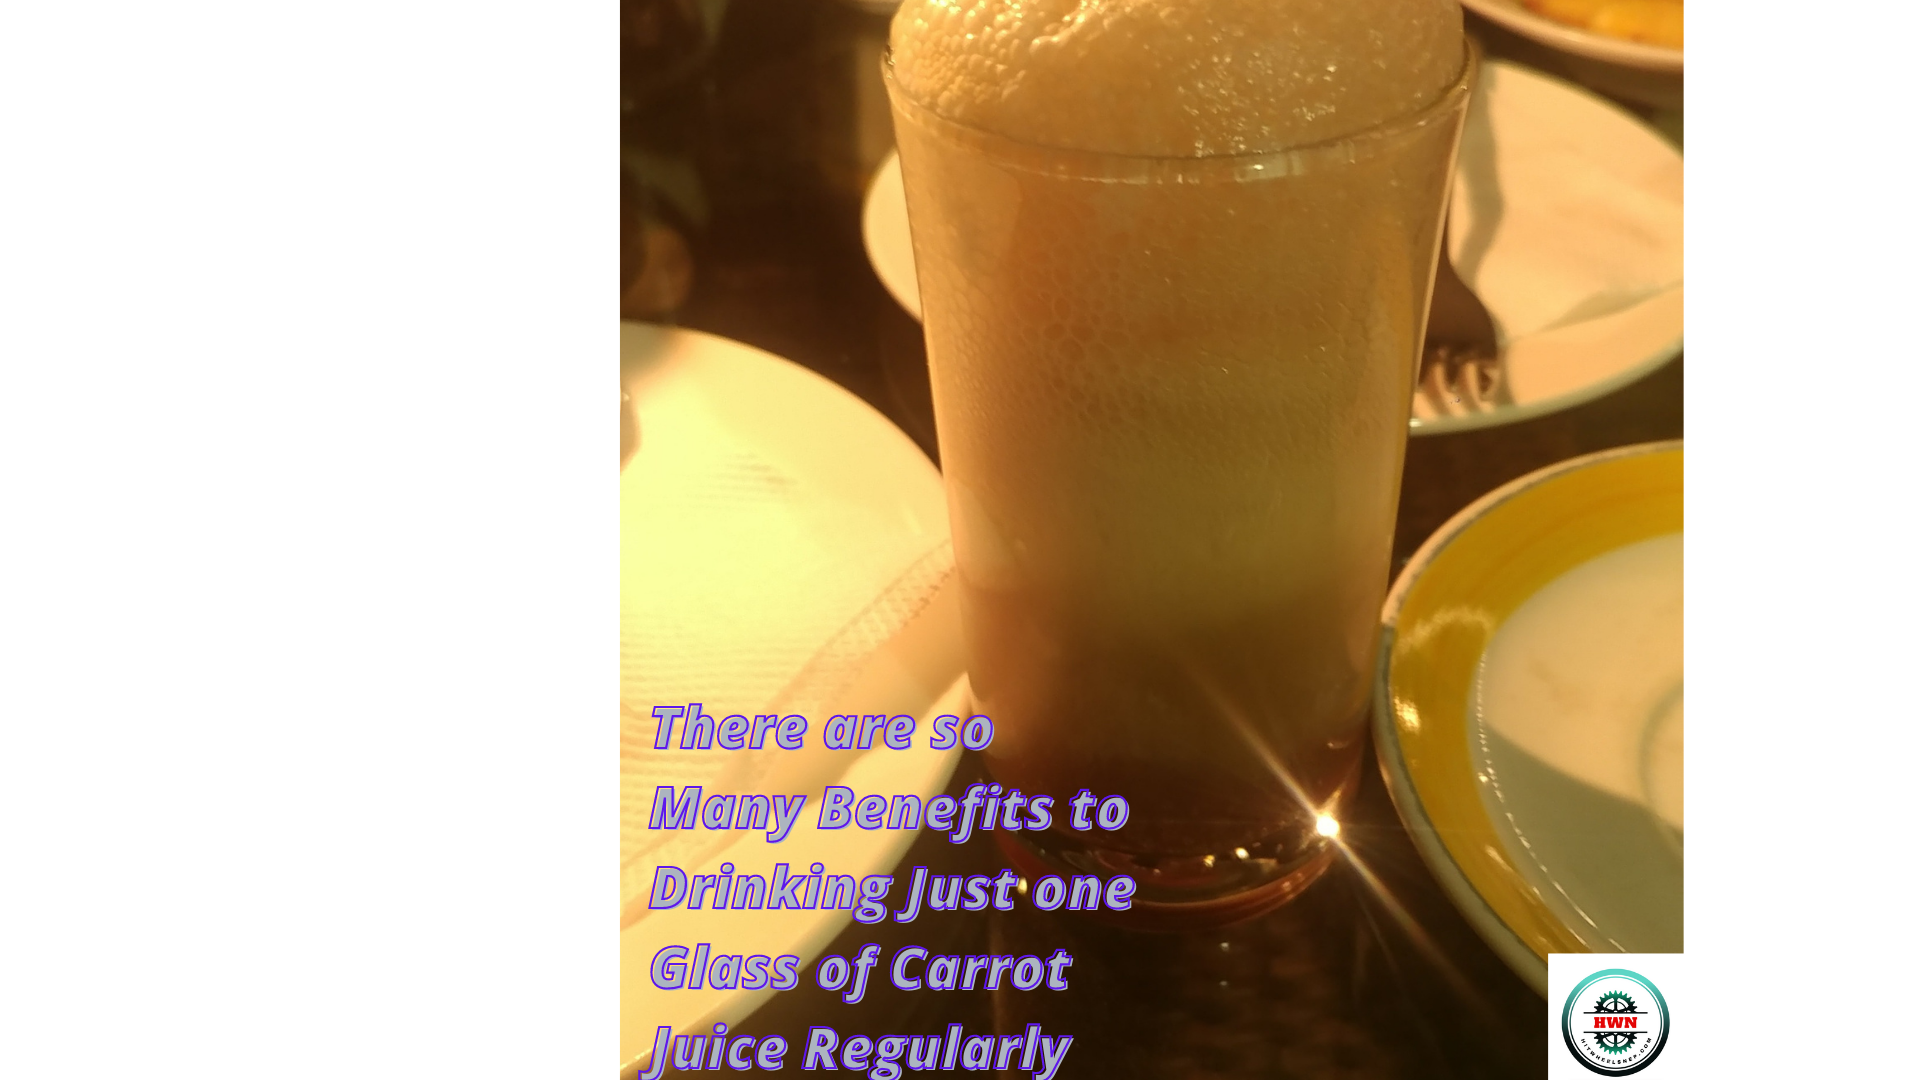 There are so Many Benefits to Drinking Just one Glass of Carrot Juice Regularly